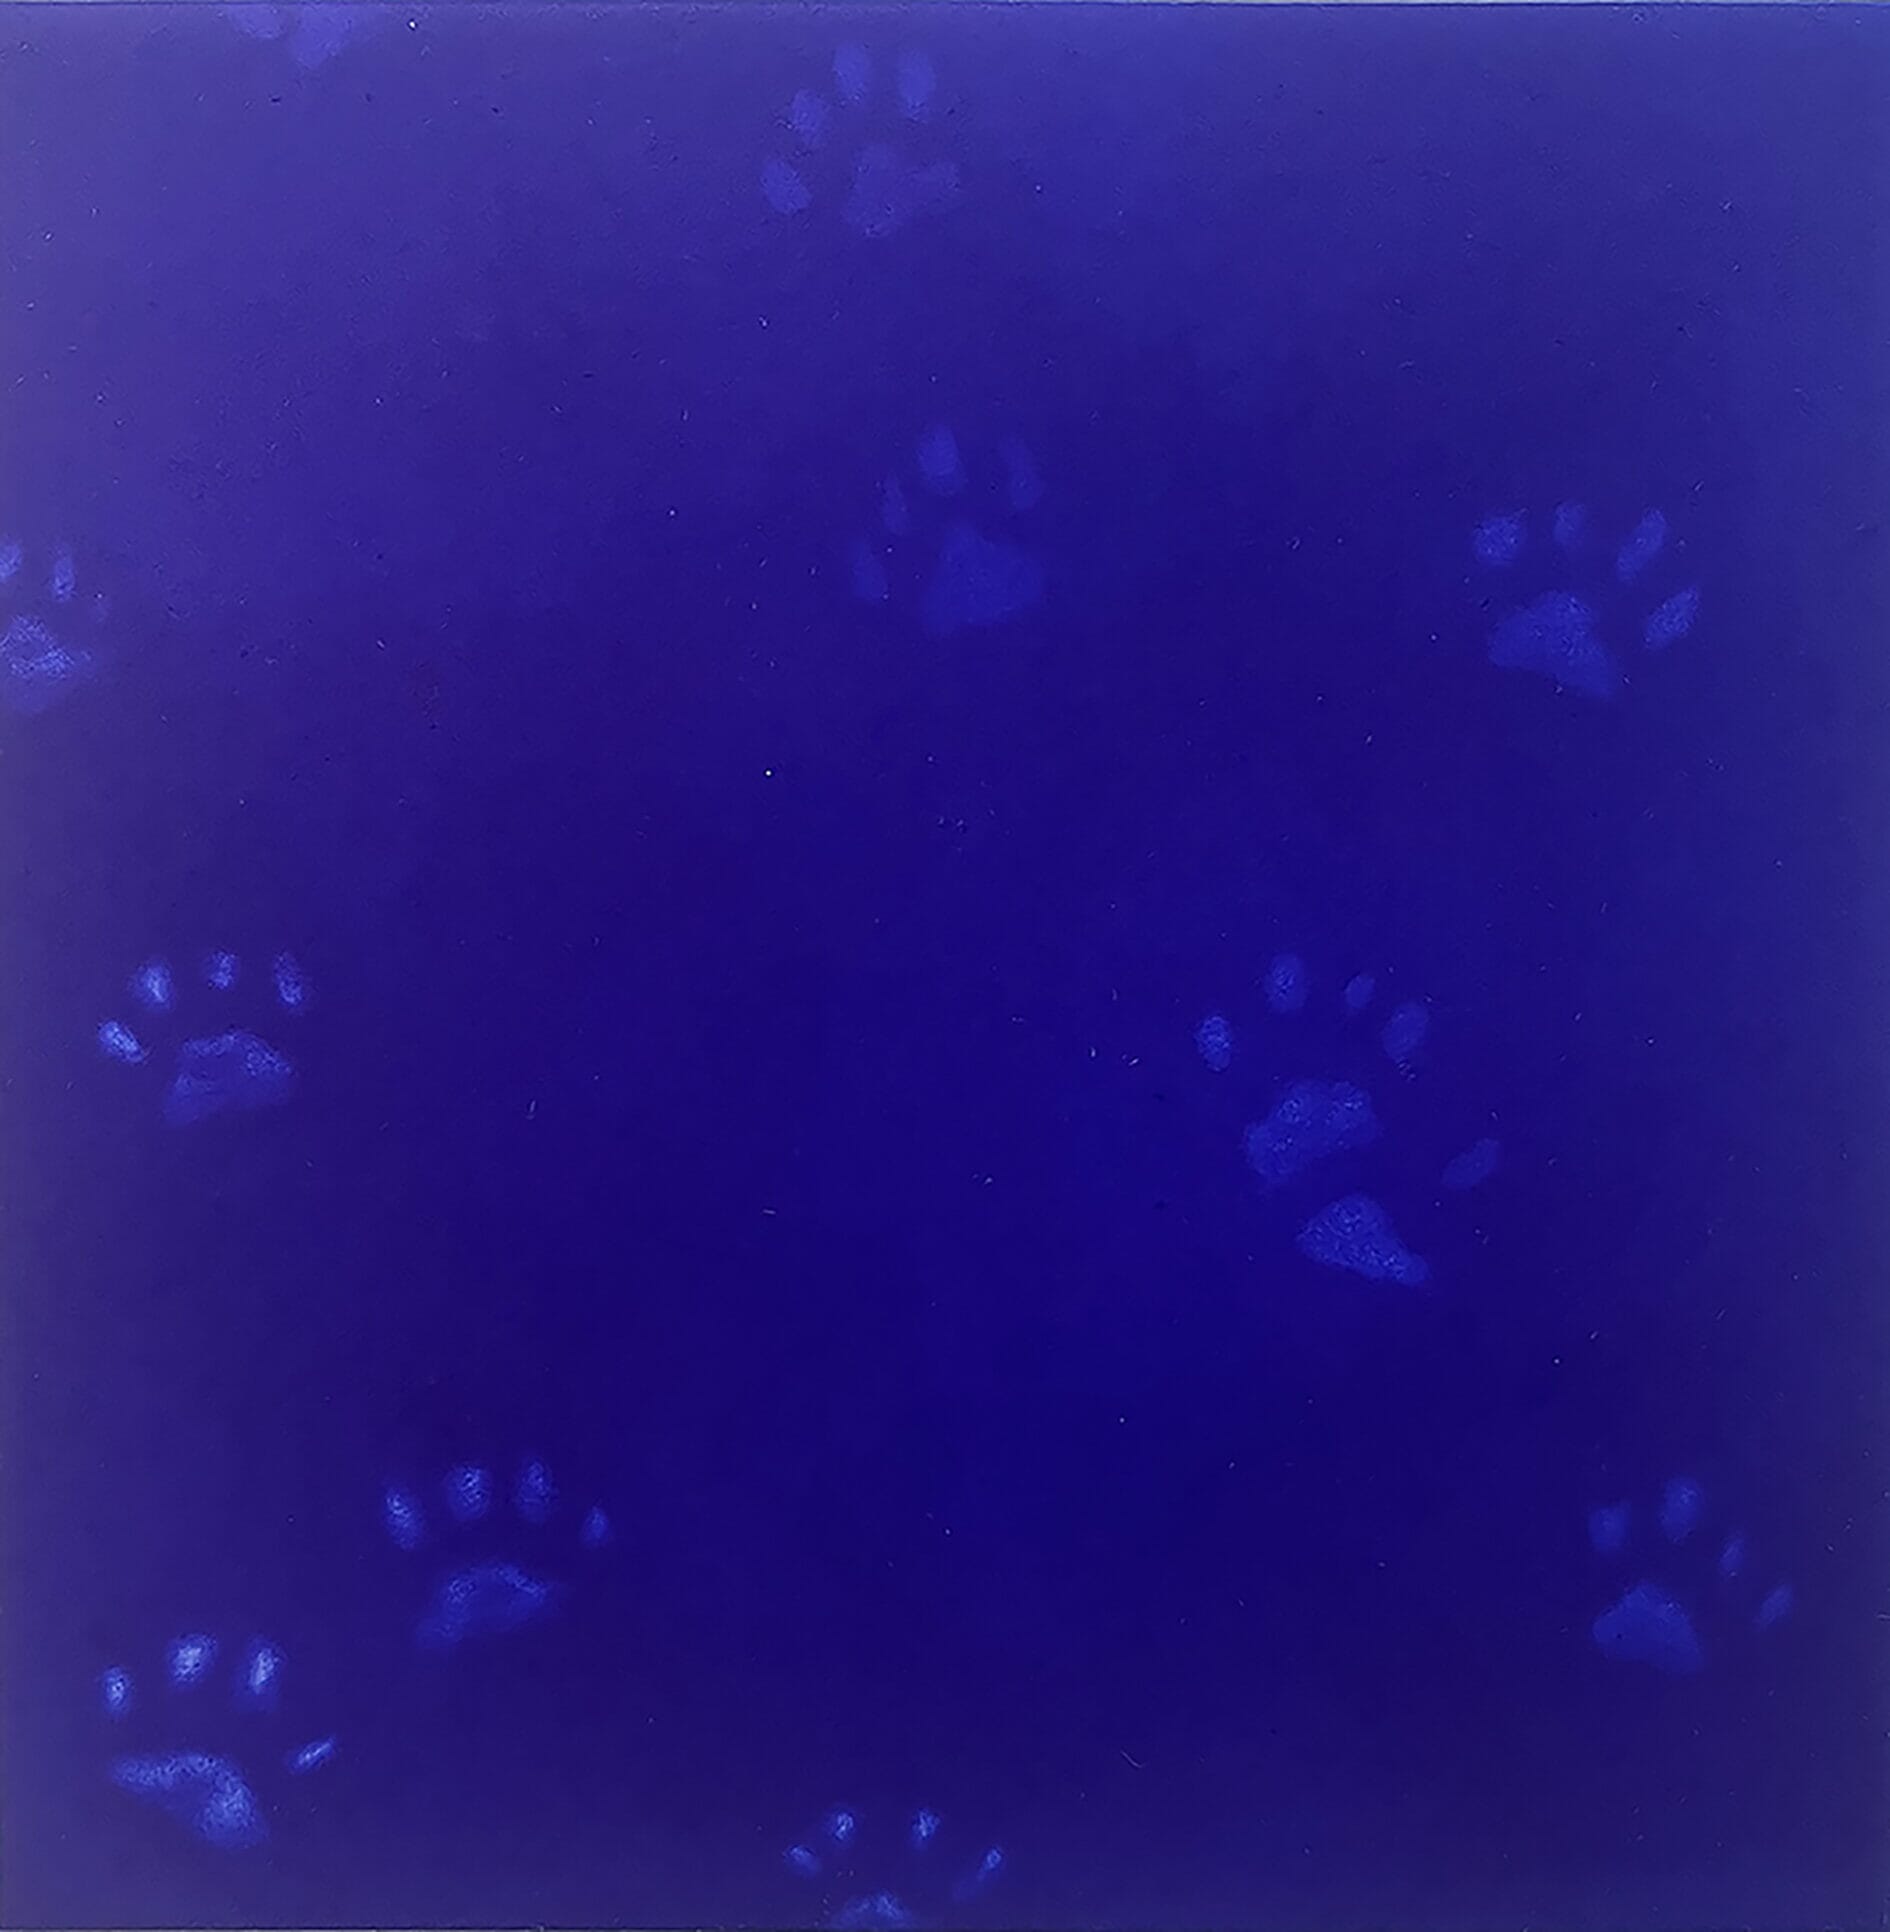 Yves Klein's cats